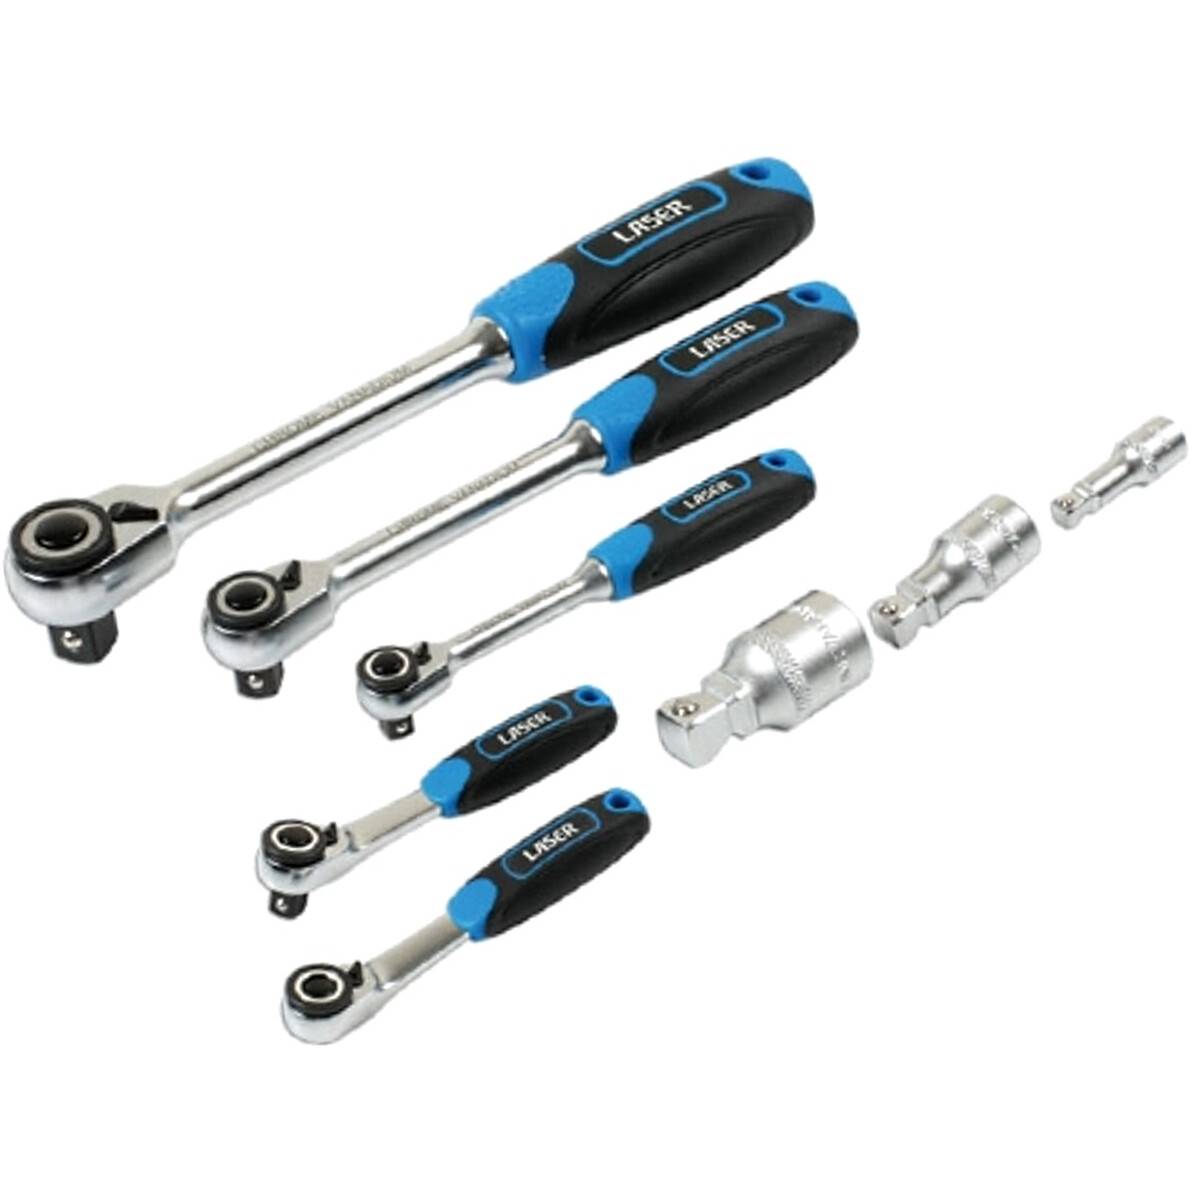 Laser 7548 Micro Head Ratchet Set 1 4 3 8 1 2 Drive From Lawson His